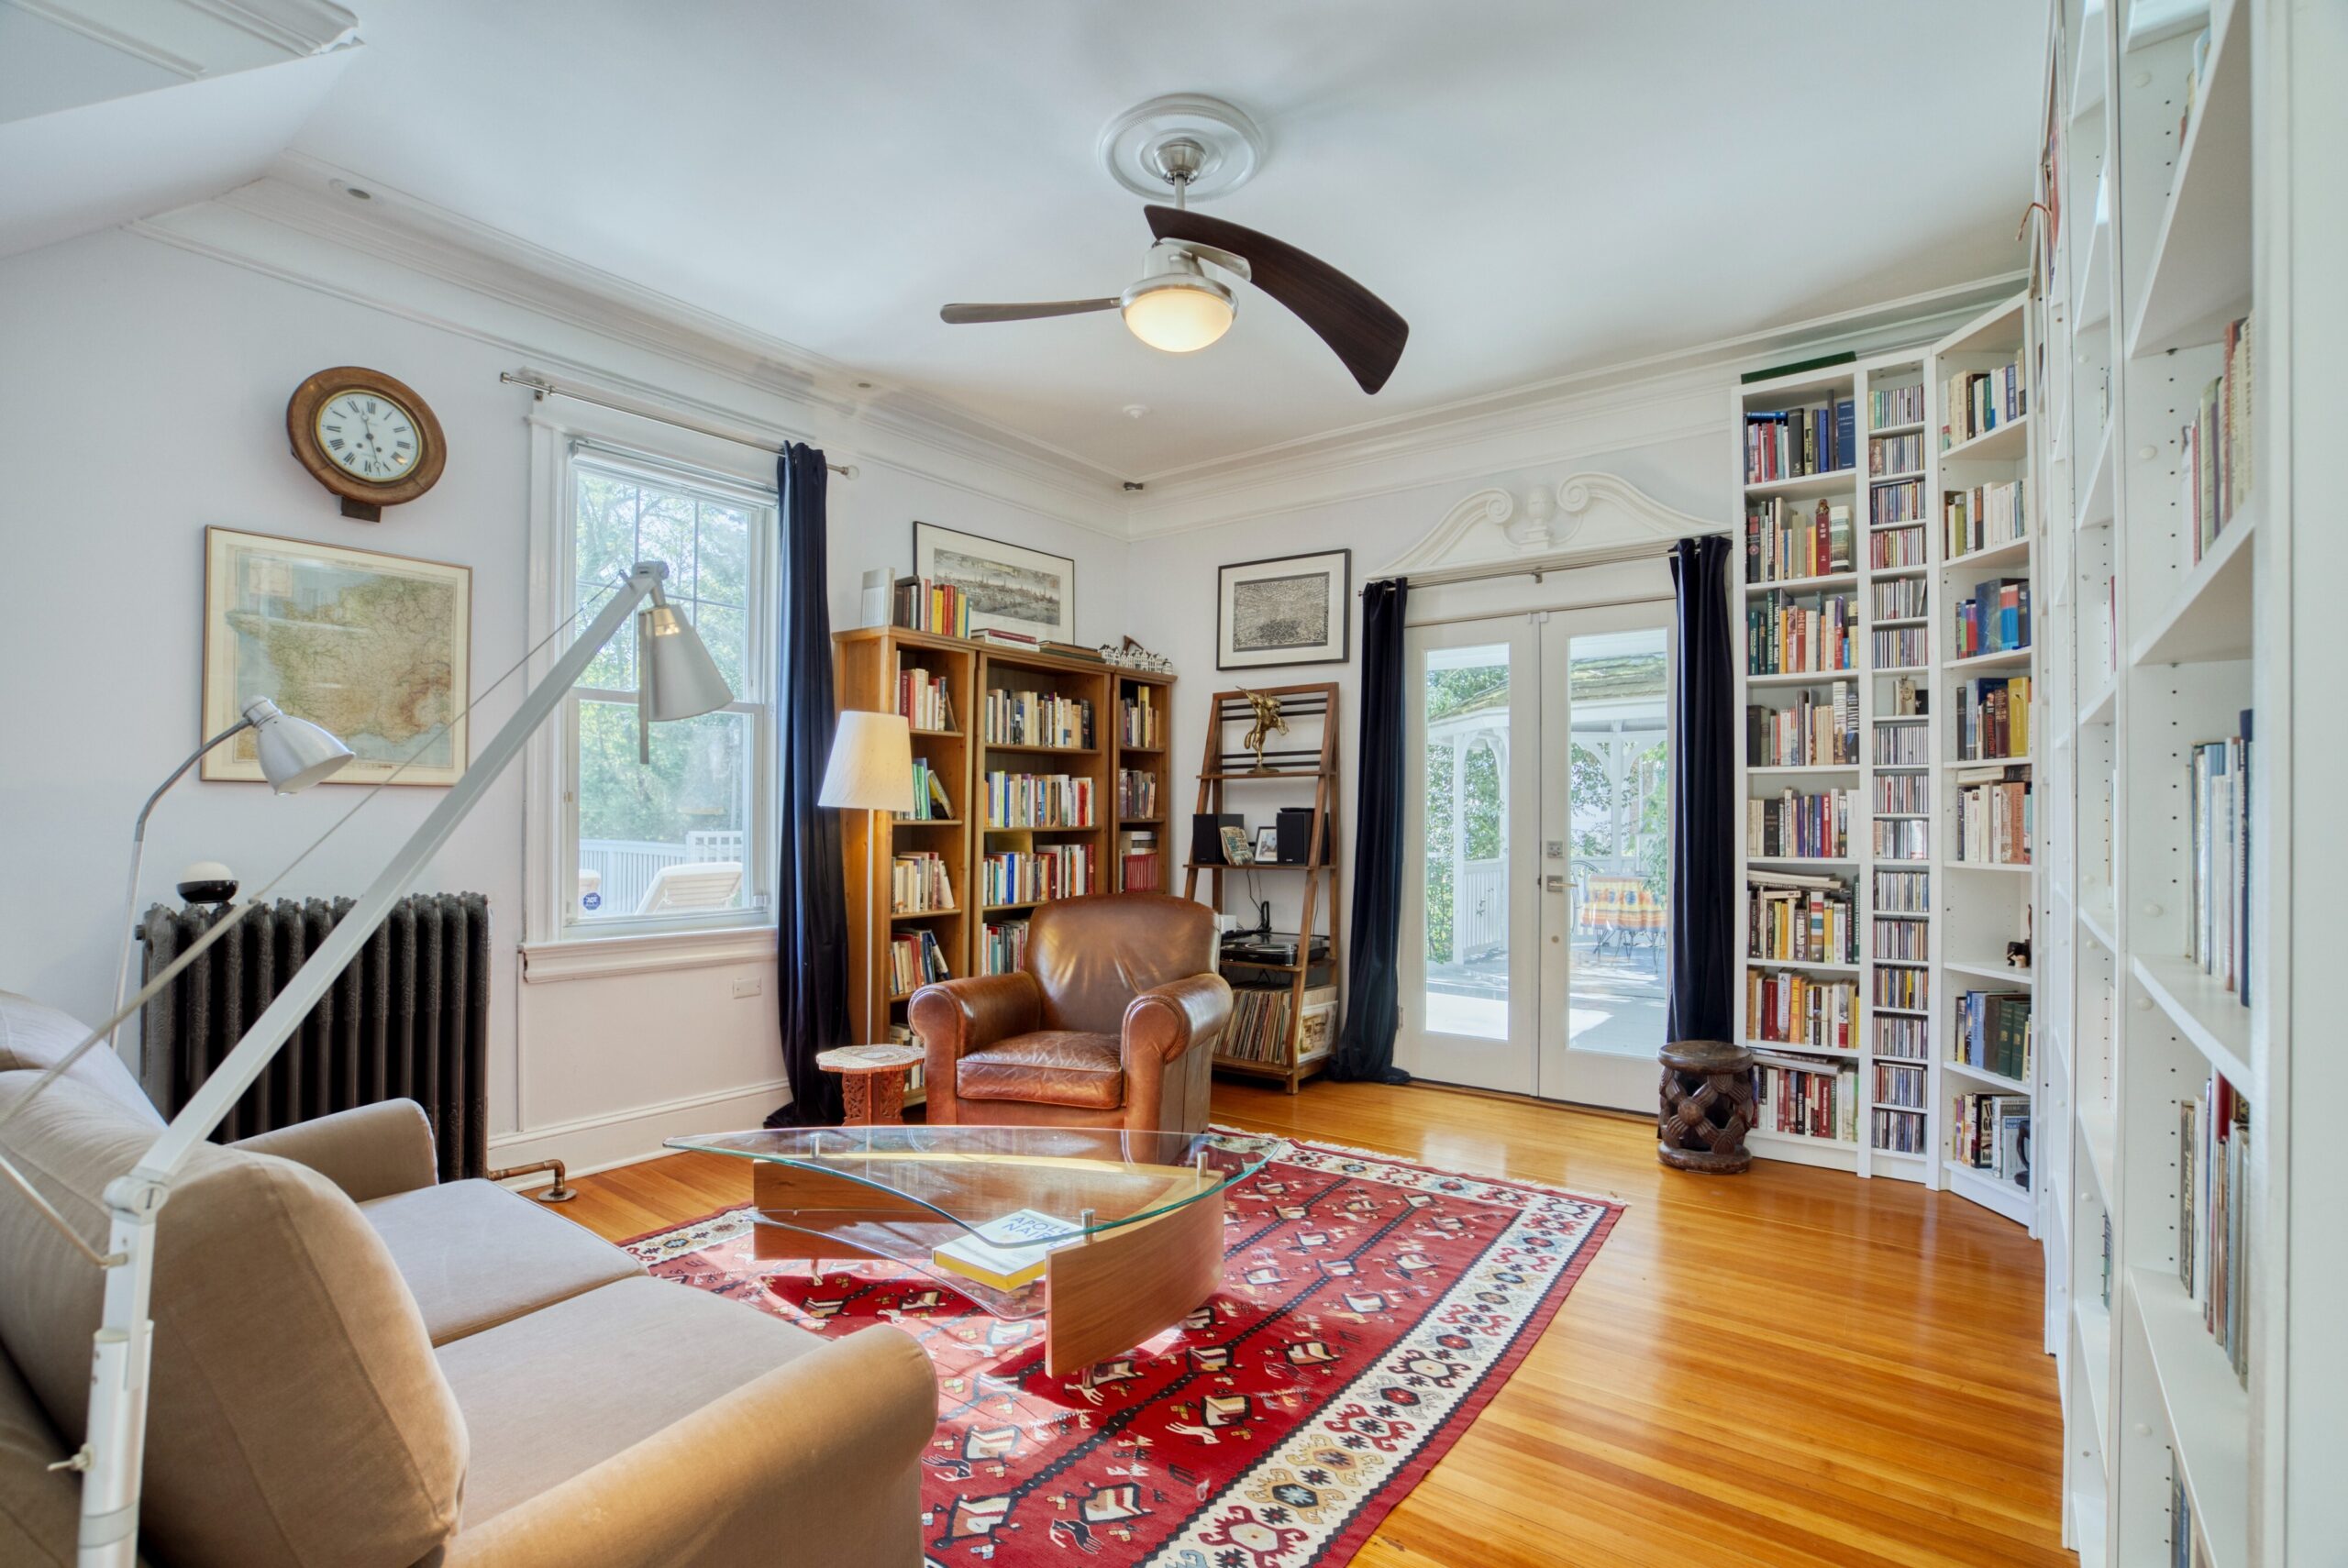 Interior professional photo of 1826 Varnum St NW - showing a study with built-in, floor-to-ceiling bookshelves, hardwood floors and antique radiator